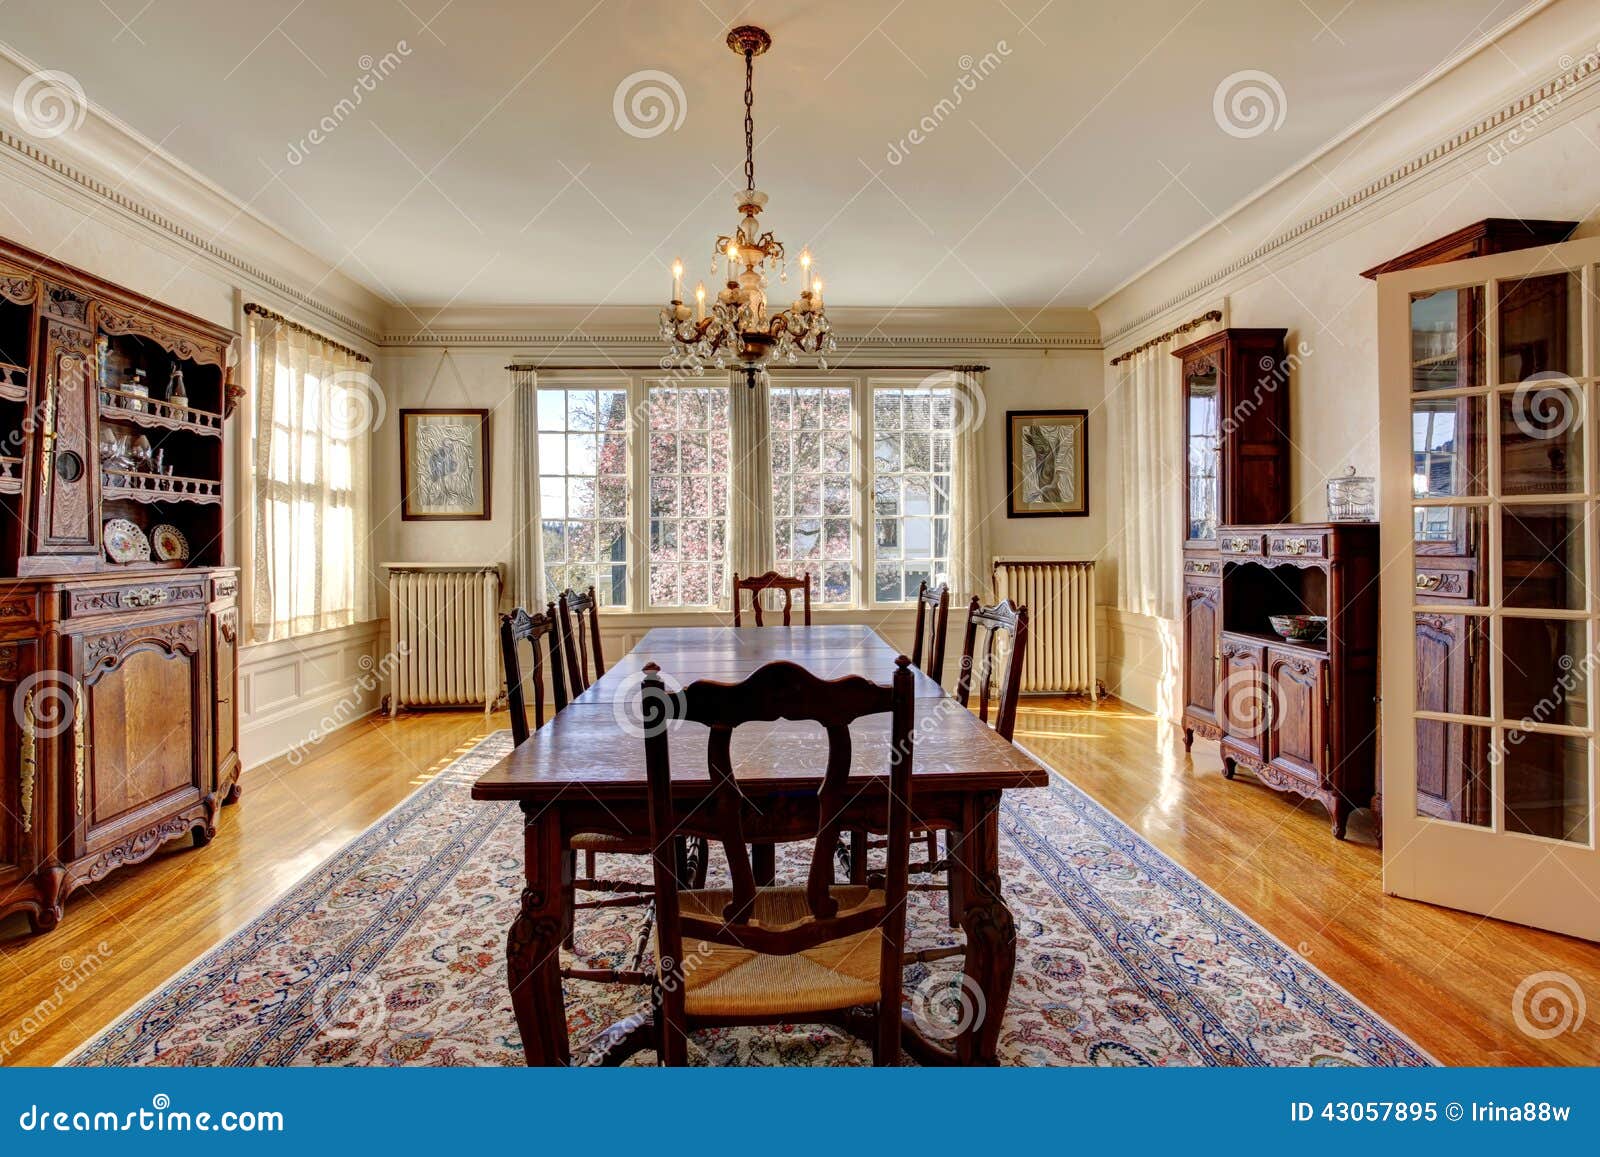 Large Dining Room In Luxury House Stock Image Image Of Eating